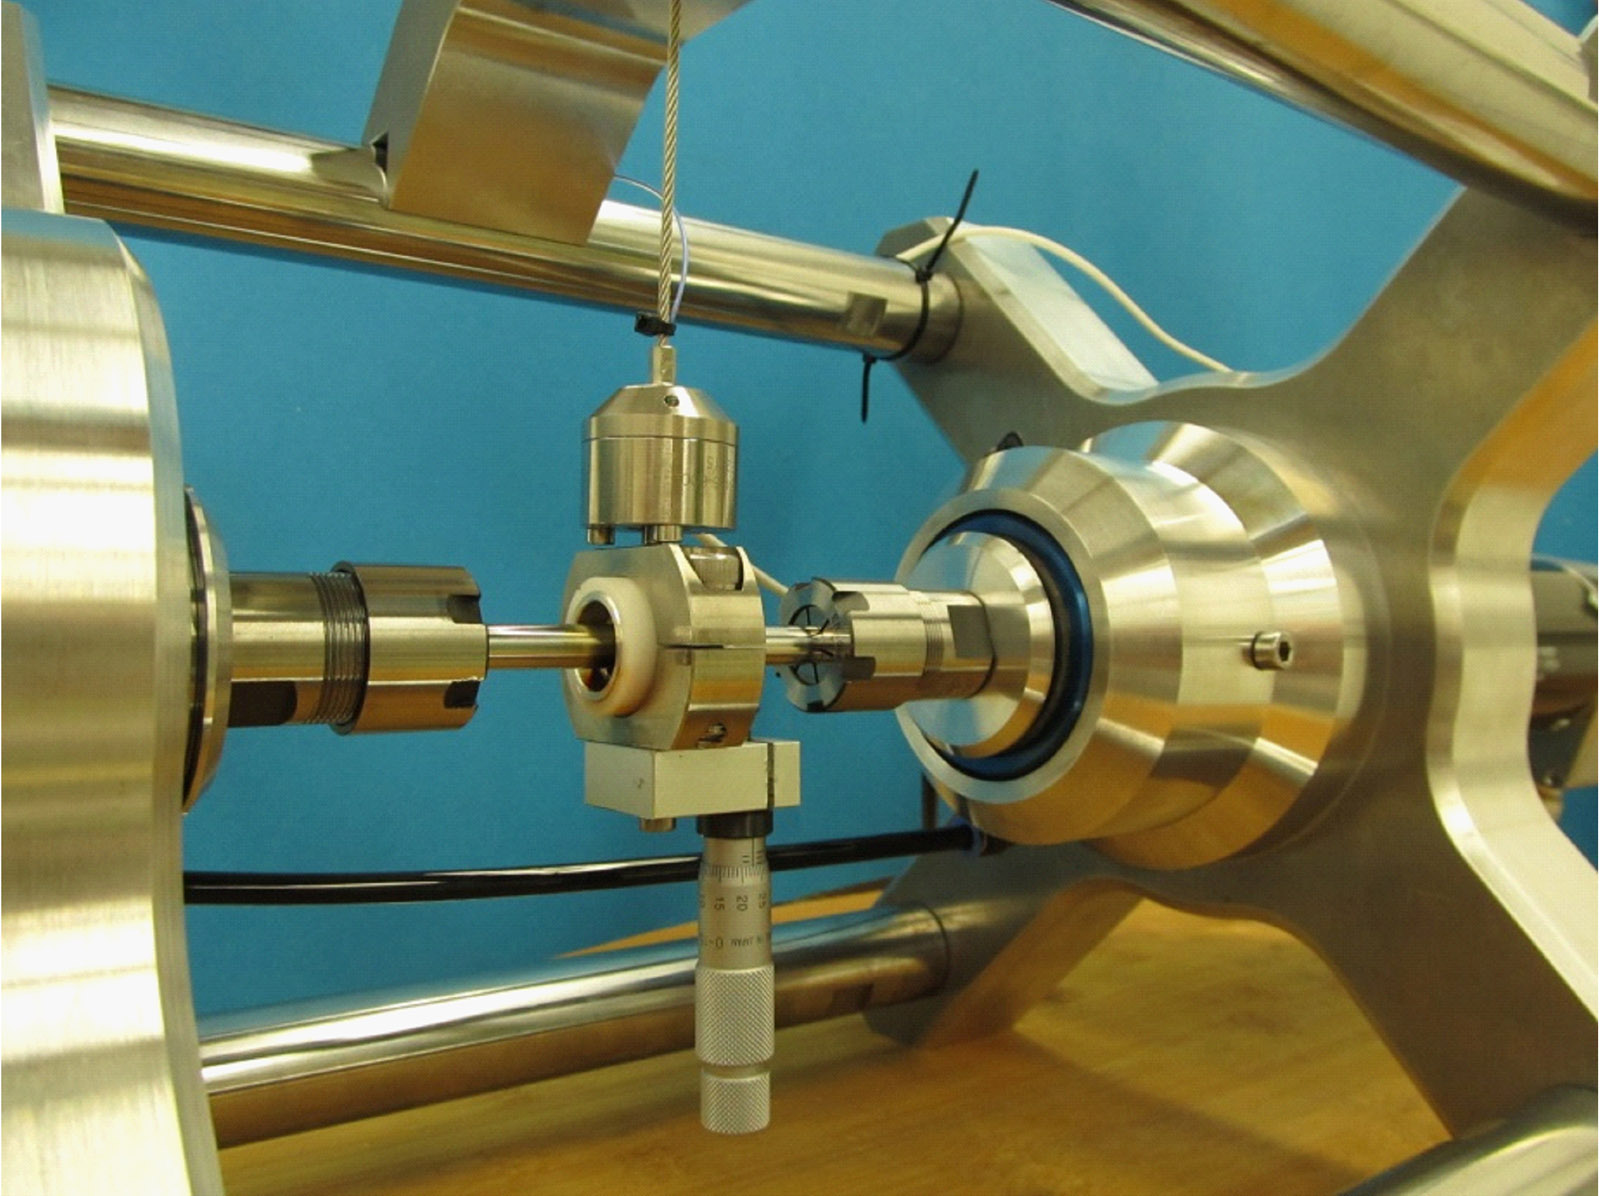 The new in situ tribometer can measure wear and friction values directly on the slide bearing during operation.